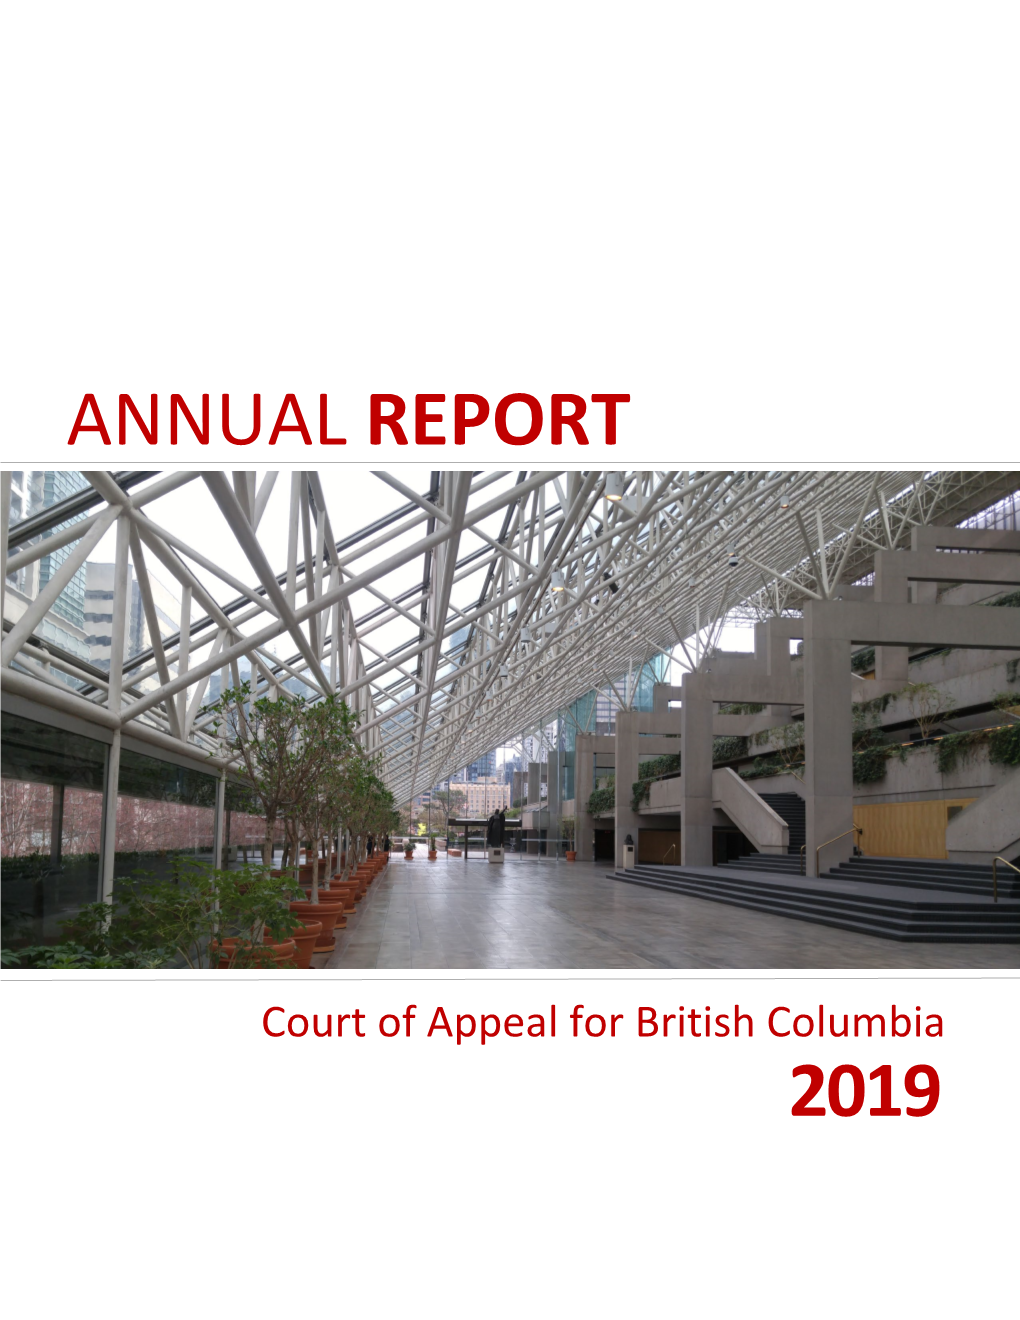 Annual Report 2019 | Court of Appeal for British Columbia I | Page